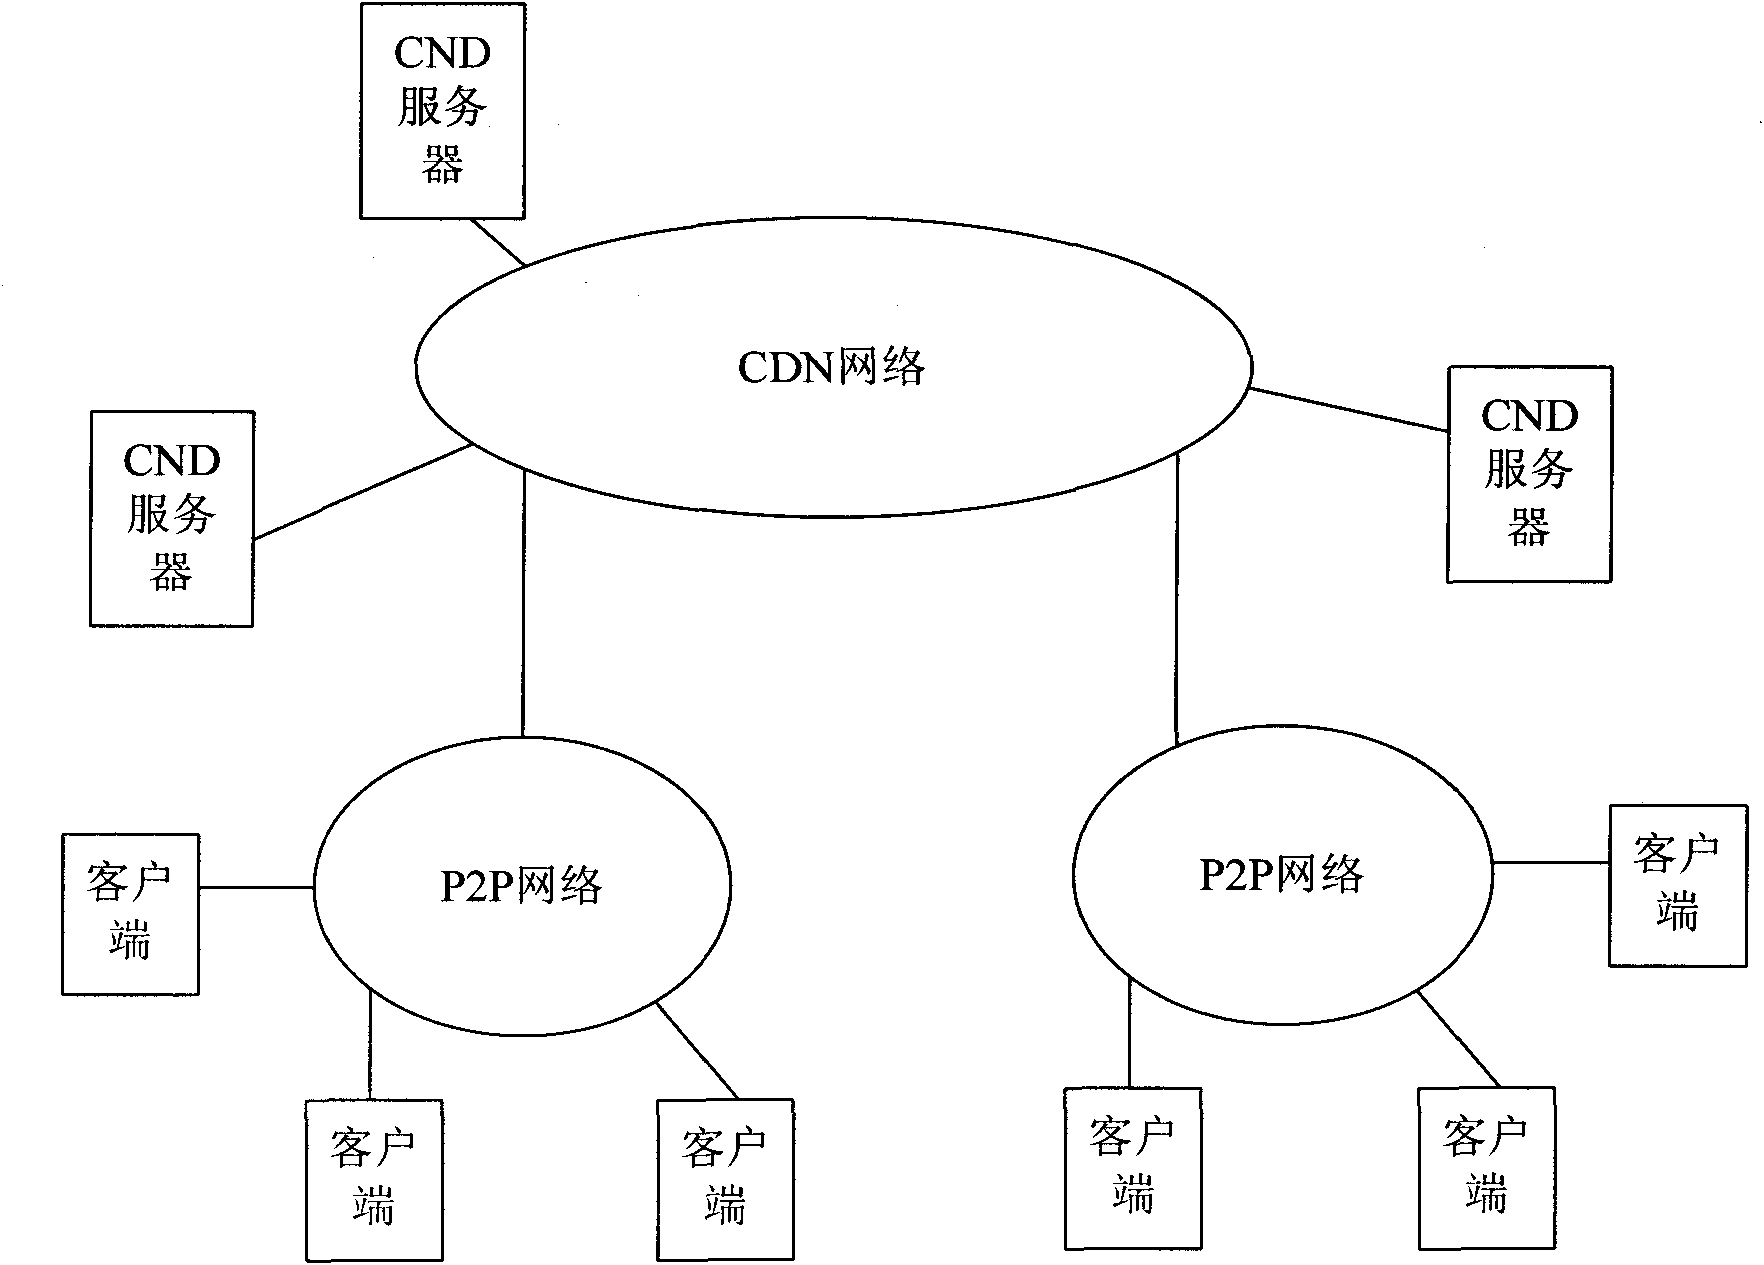 Method and system for placing resources replication in CDN-P2P (Content Distribution Network-Peer-to-Peer) network